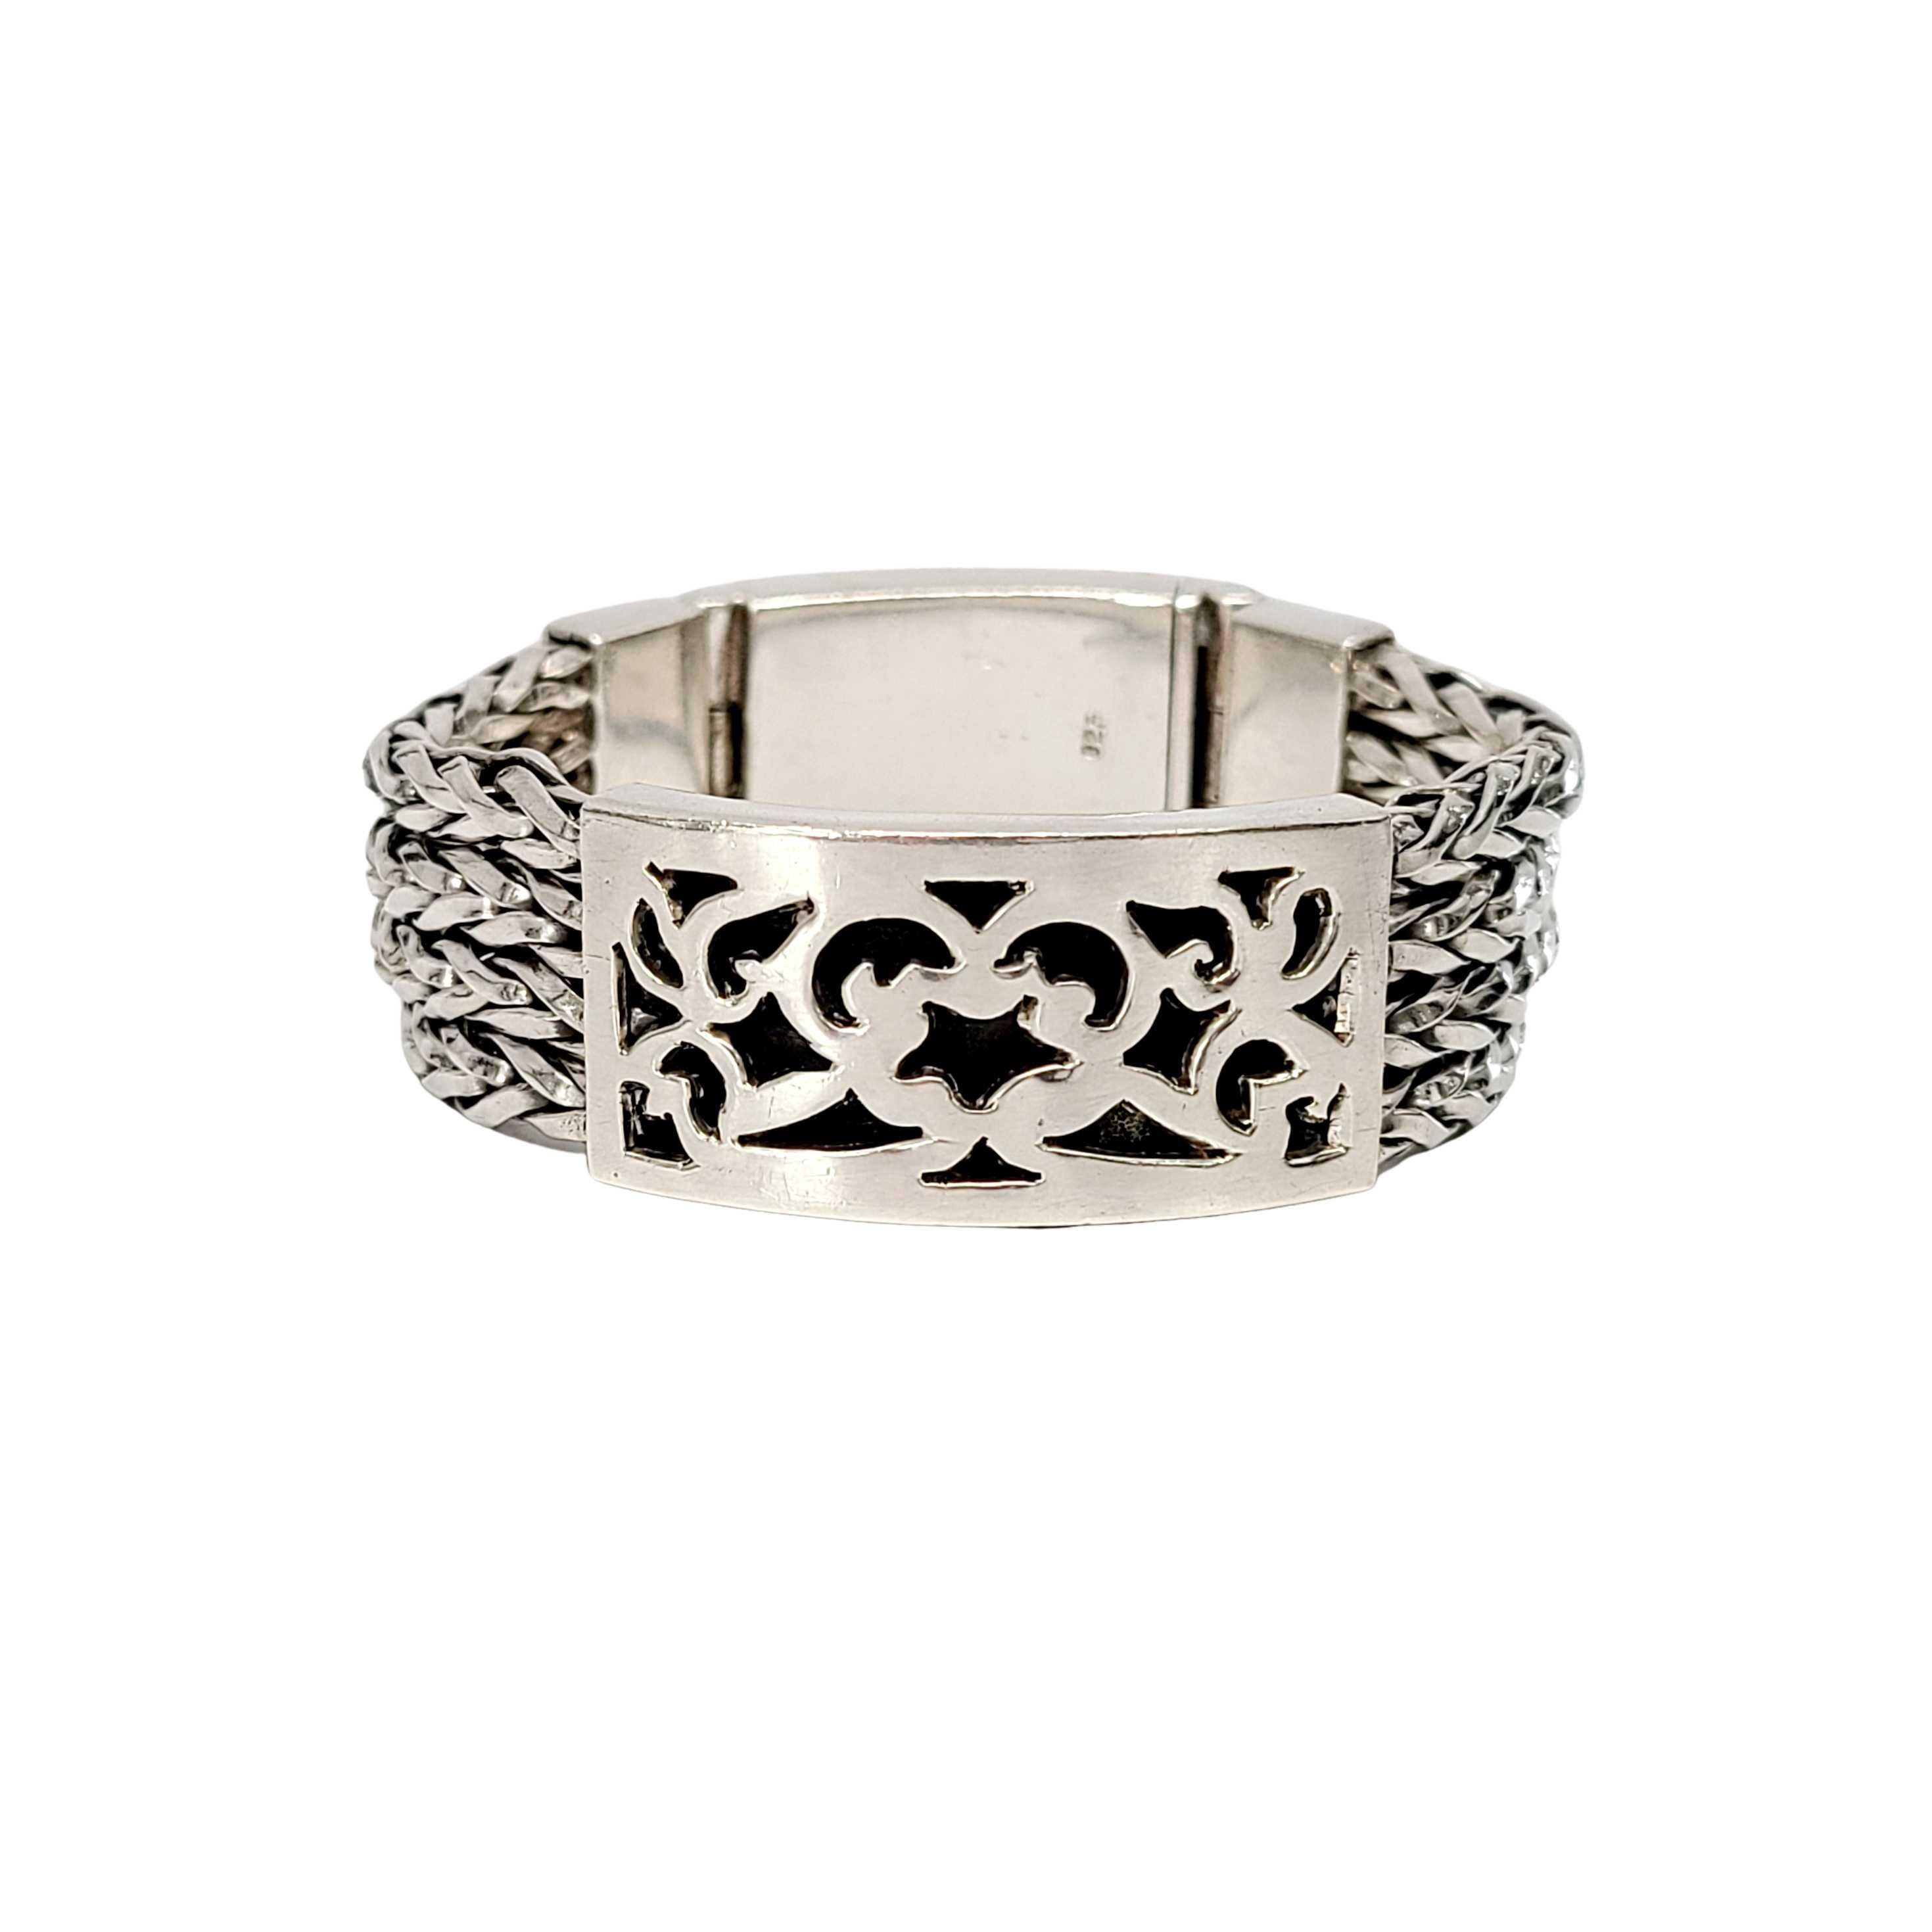 Sterling silver wheat box clasp bracelet.

This heavy and substantial bracelet features 4 thick woven/wheat strands, a rectangular station with open work scroll design sits at front. Large box slide clasp closure with safety lock.

Measures 6 1/4